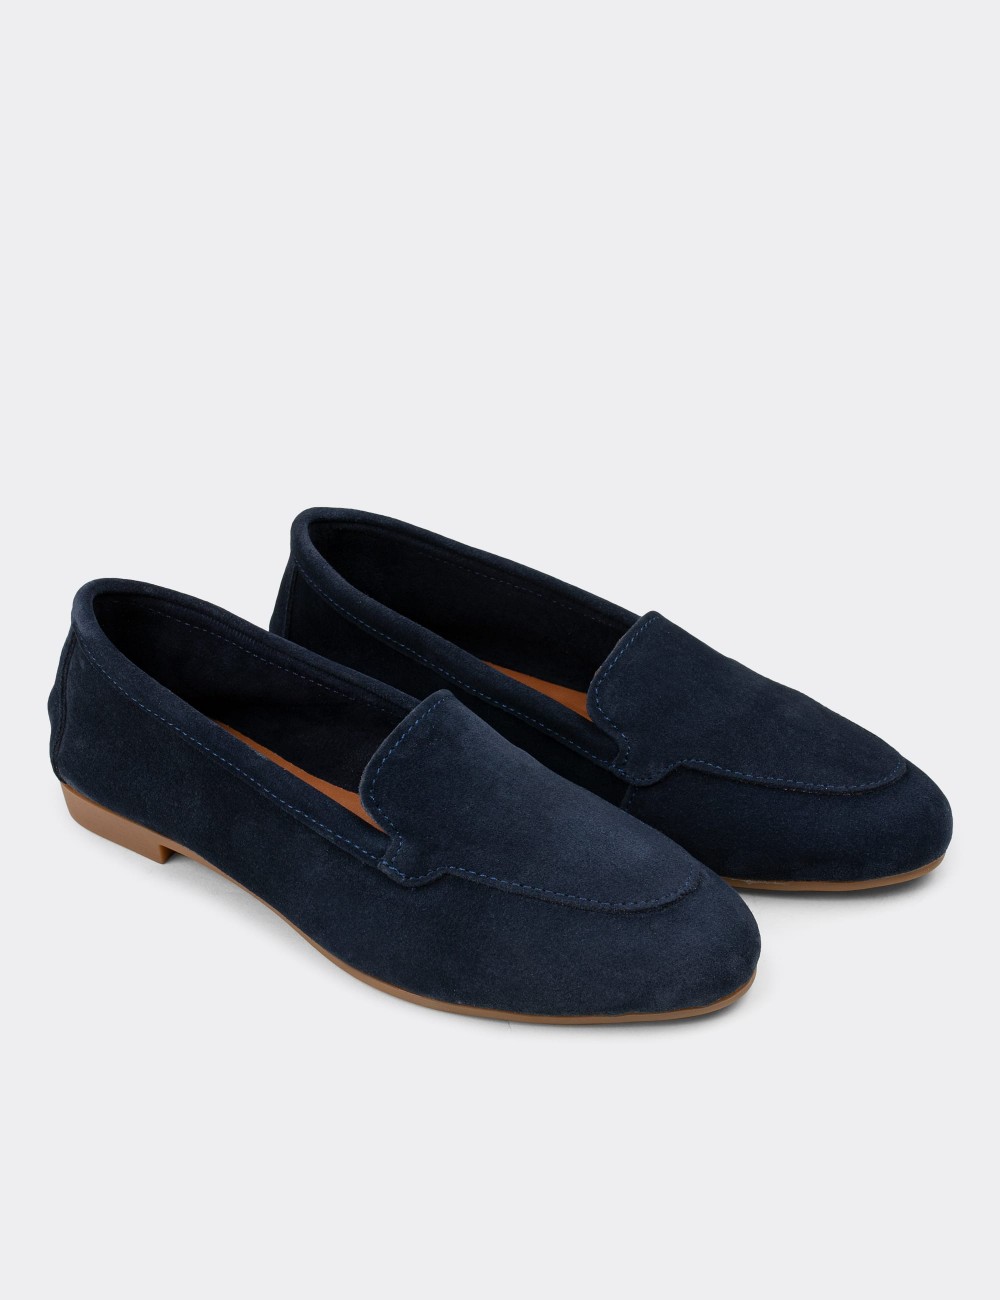 Navy Suede Leather Loafers - E3206ZLCVC03